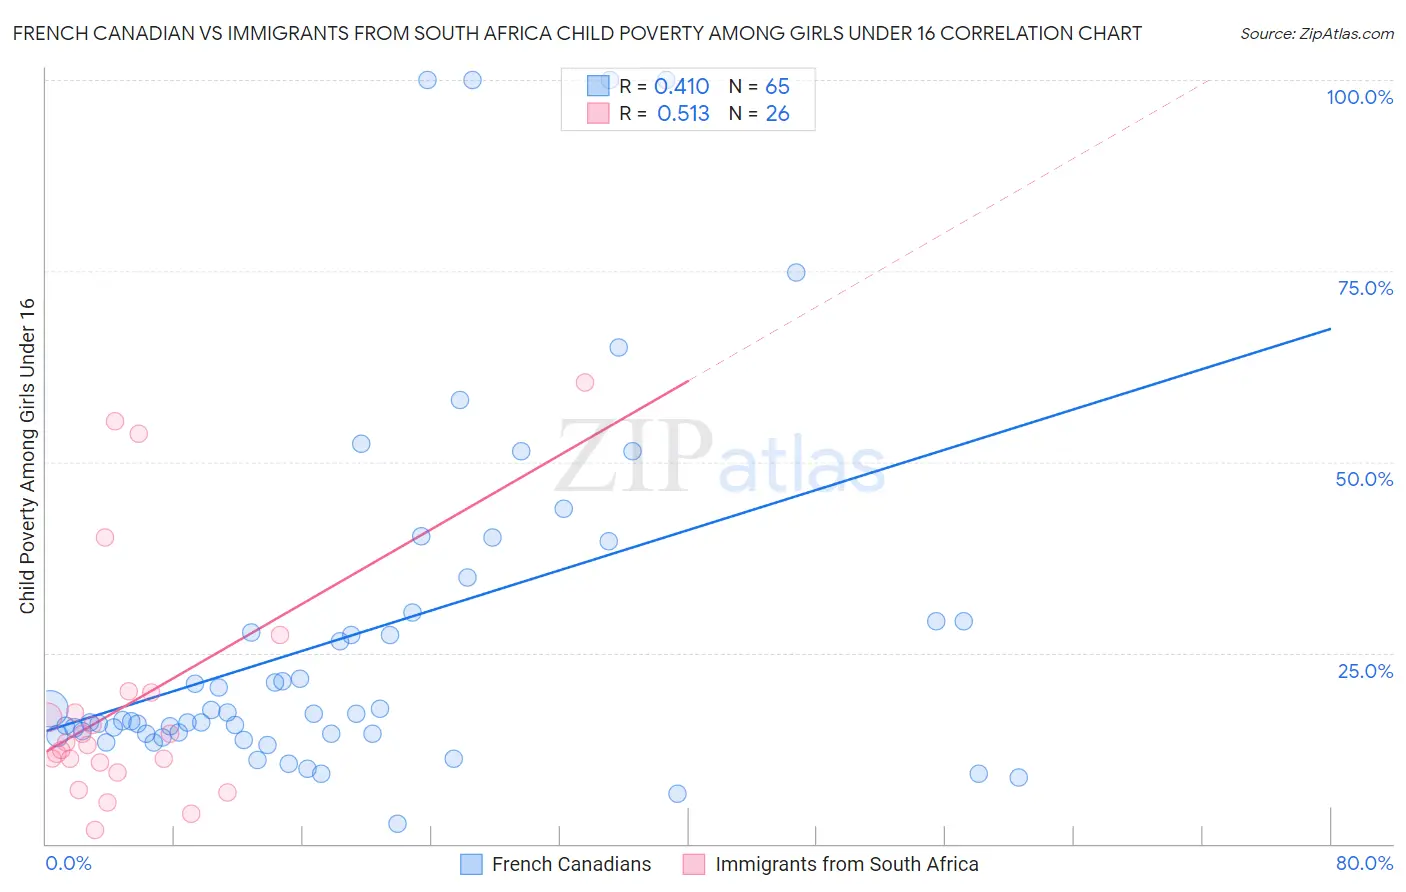 French Canadian vs Immigrants from South Africa Child Poverty Among Girls Under 16